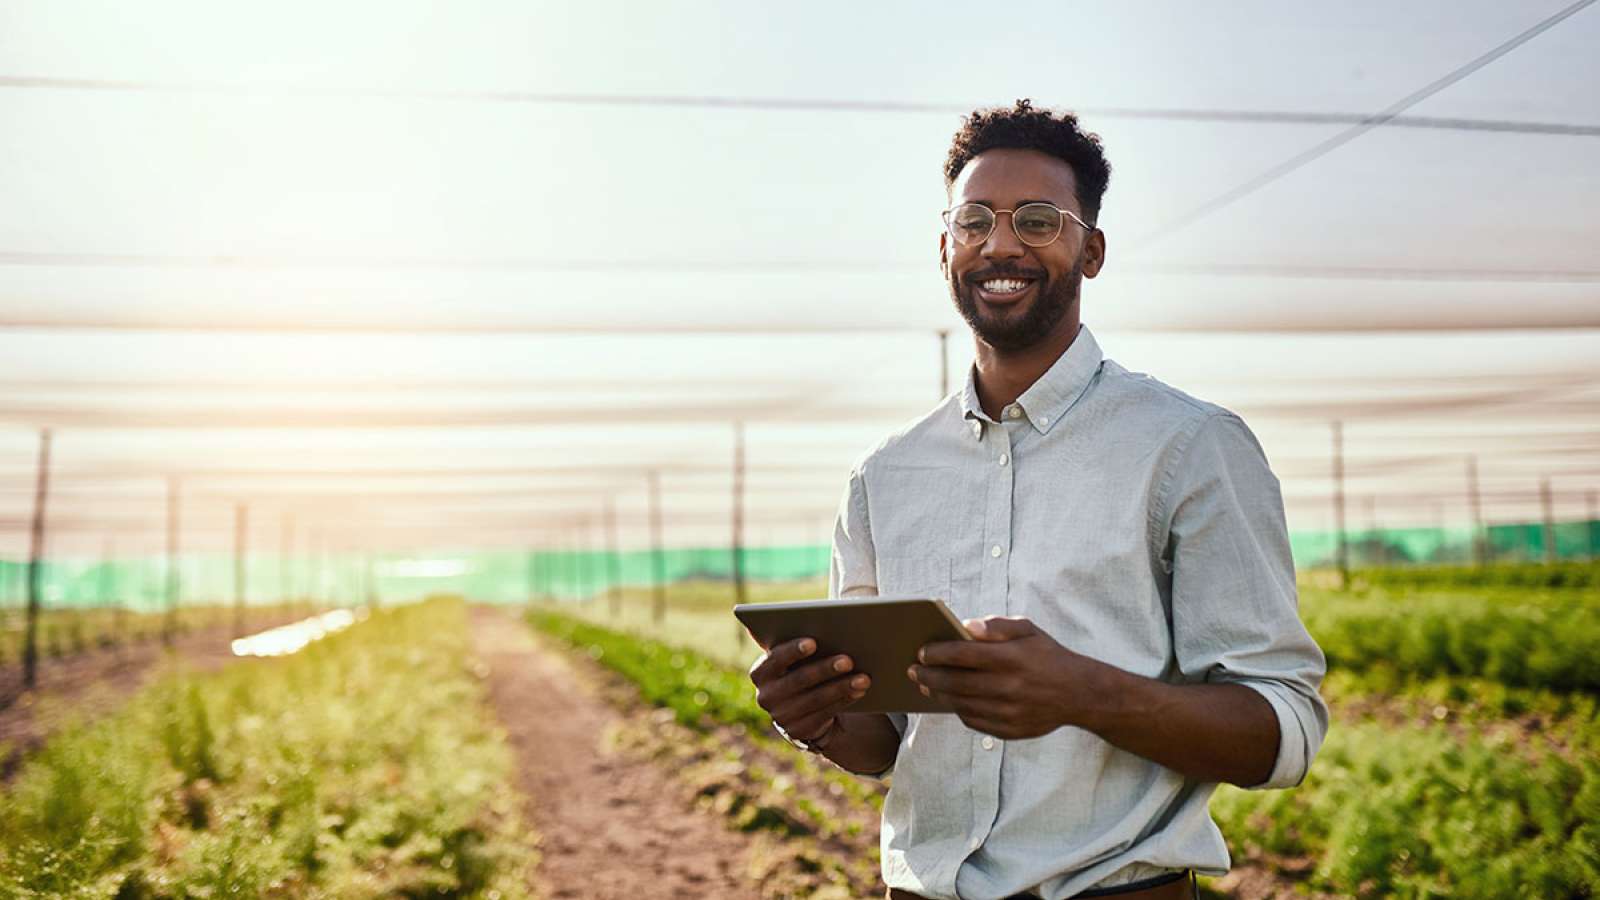 Man with glasses holding tablet in a field of plants